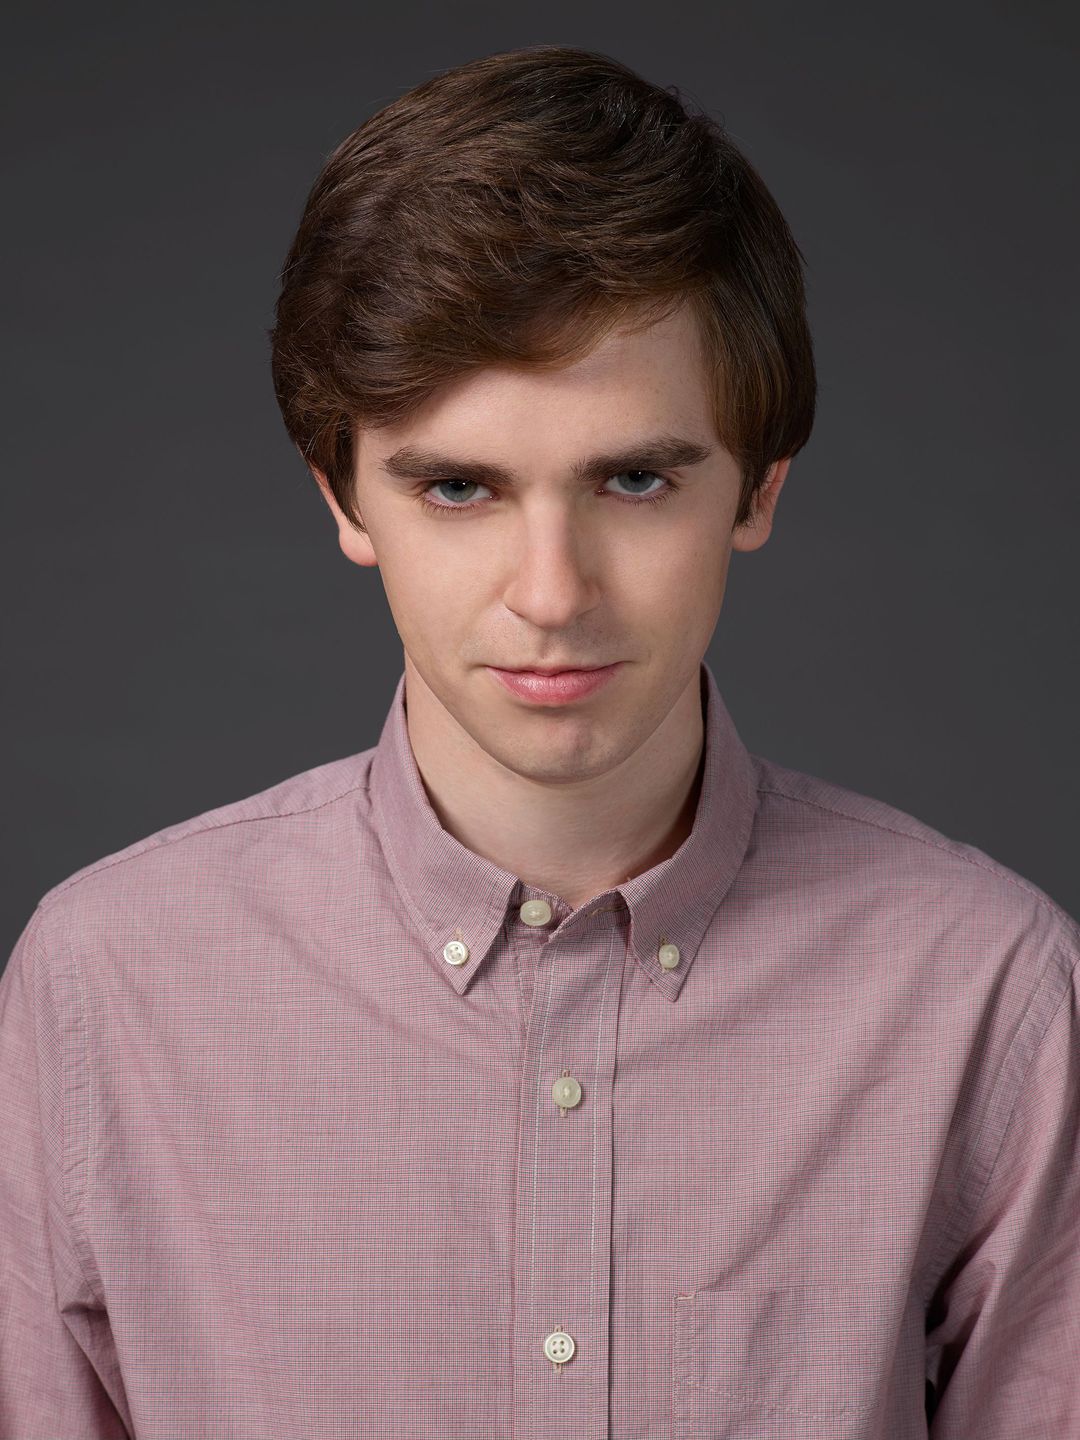 Freddie Highmore who is he